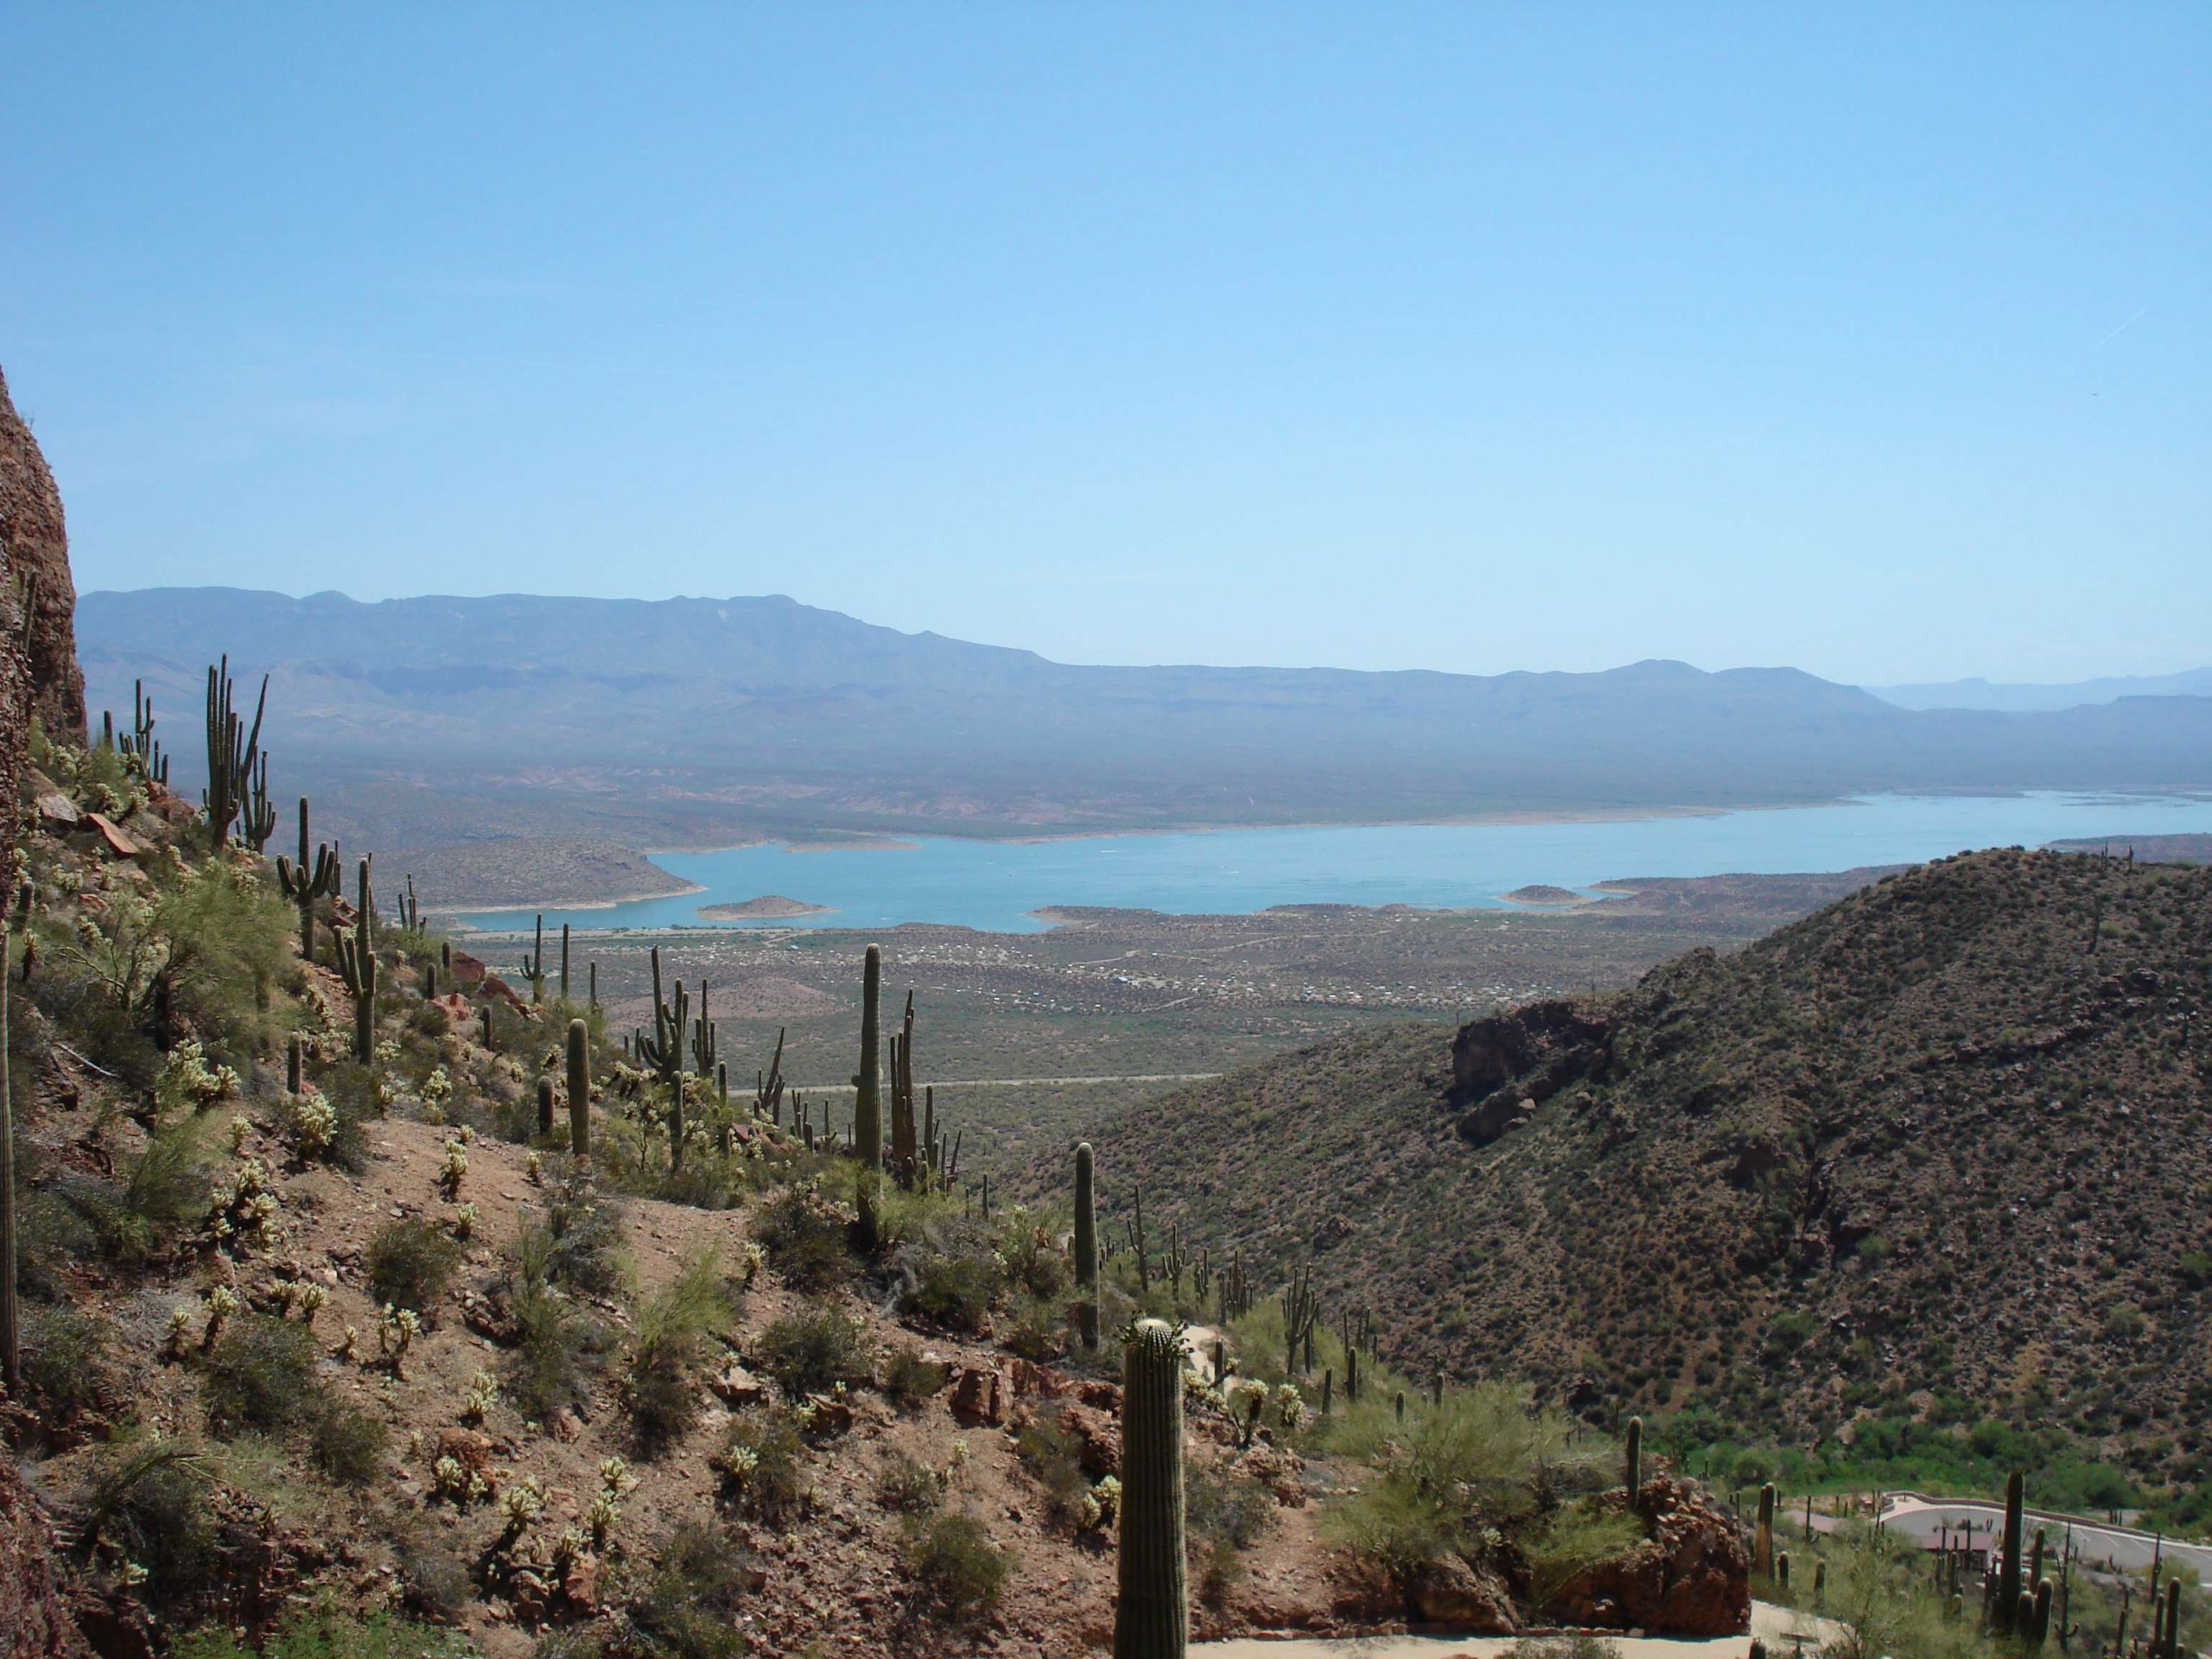 Theodore Roosevelt Lake is the largest lake or reservoir located entirely within the state of Arizona.